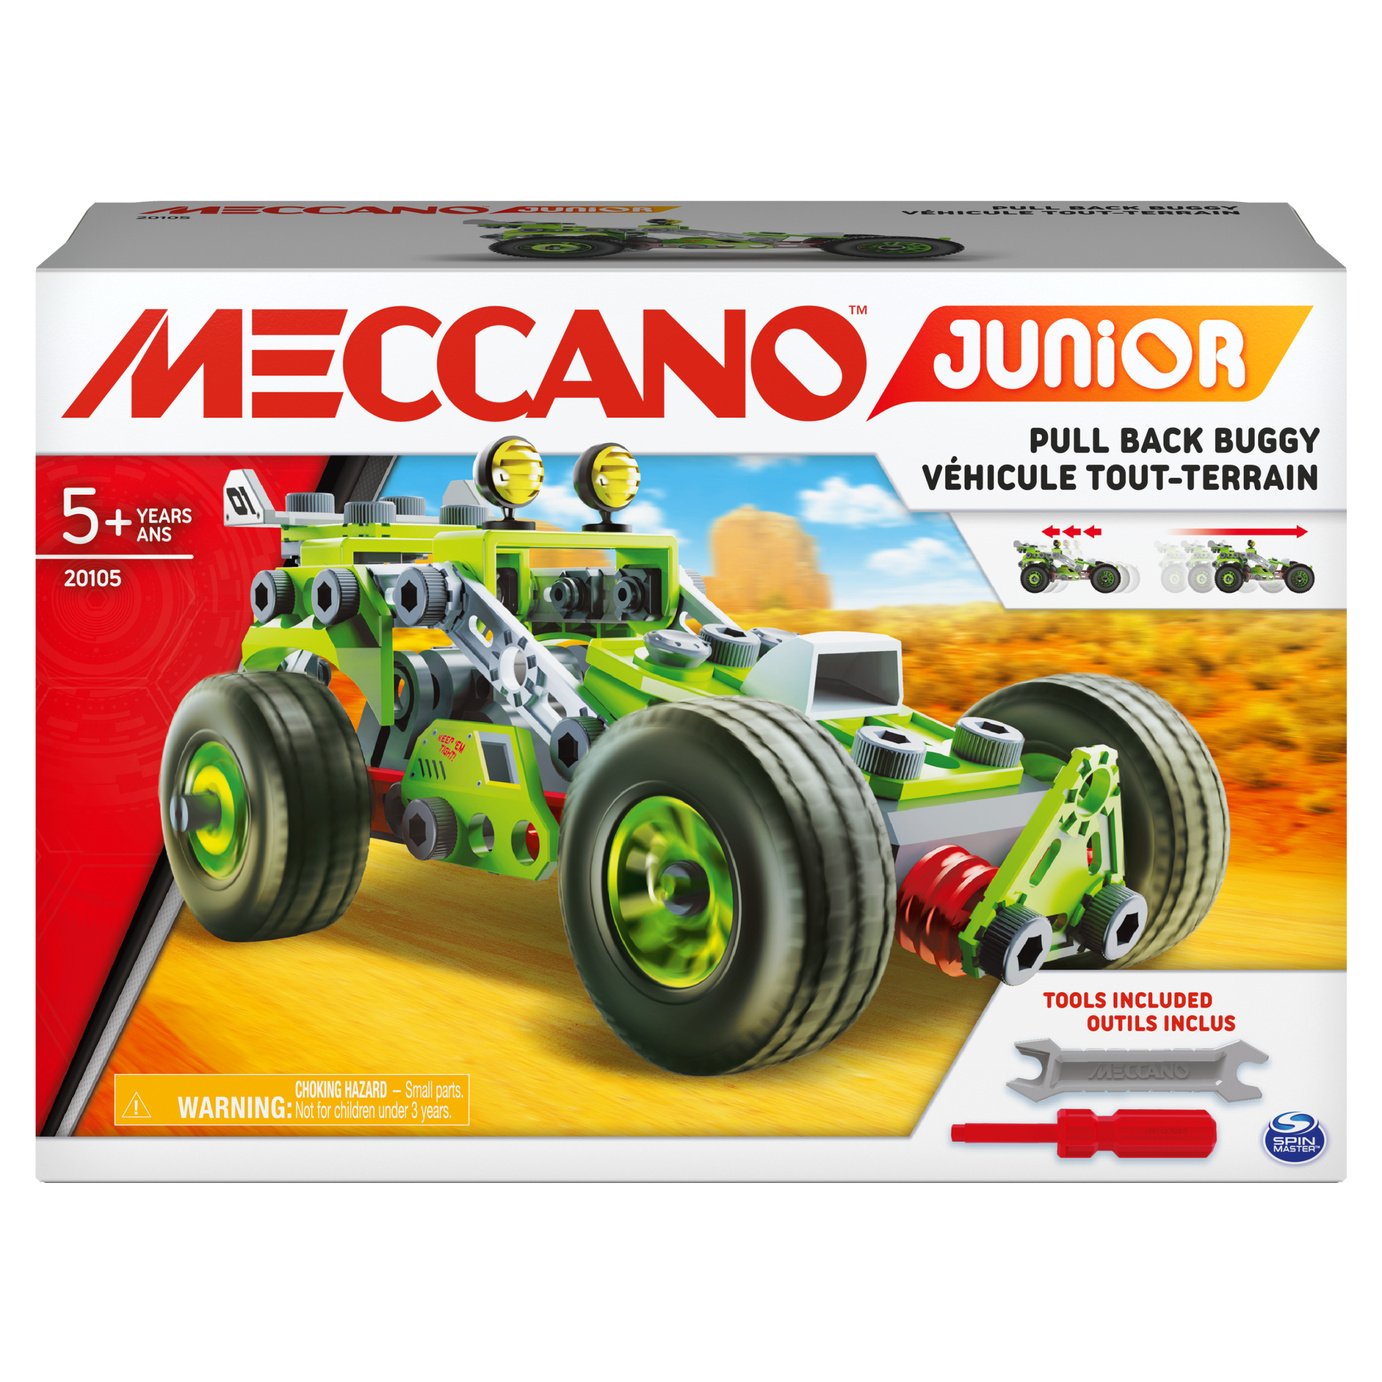 Meccano Junior Deluxe Buggy Vehicle Review